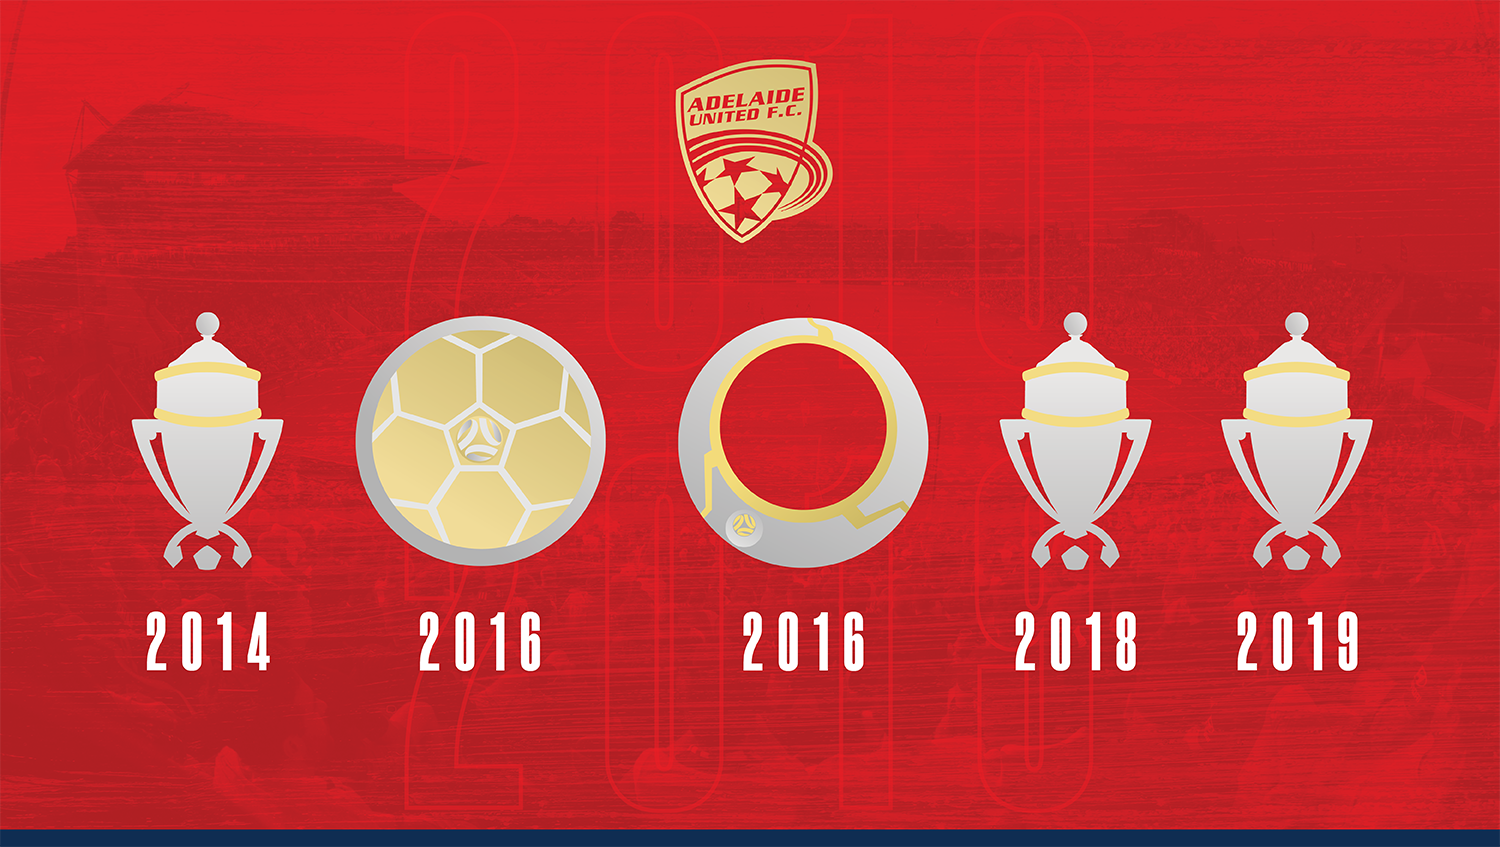 Adelaide United trophies of the decade 2010-2019